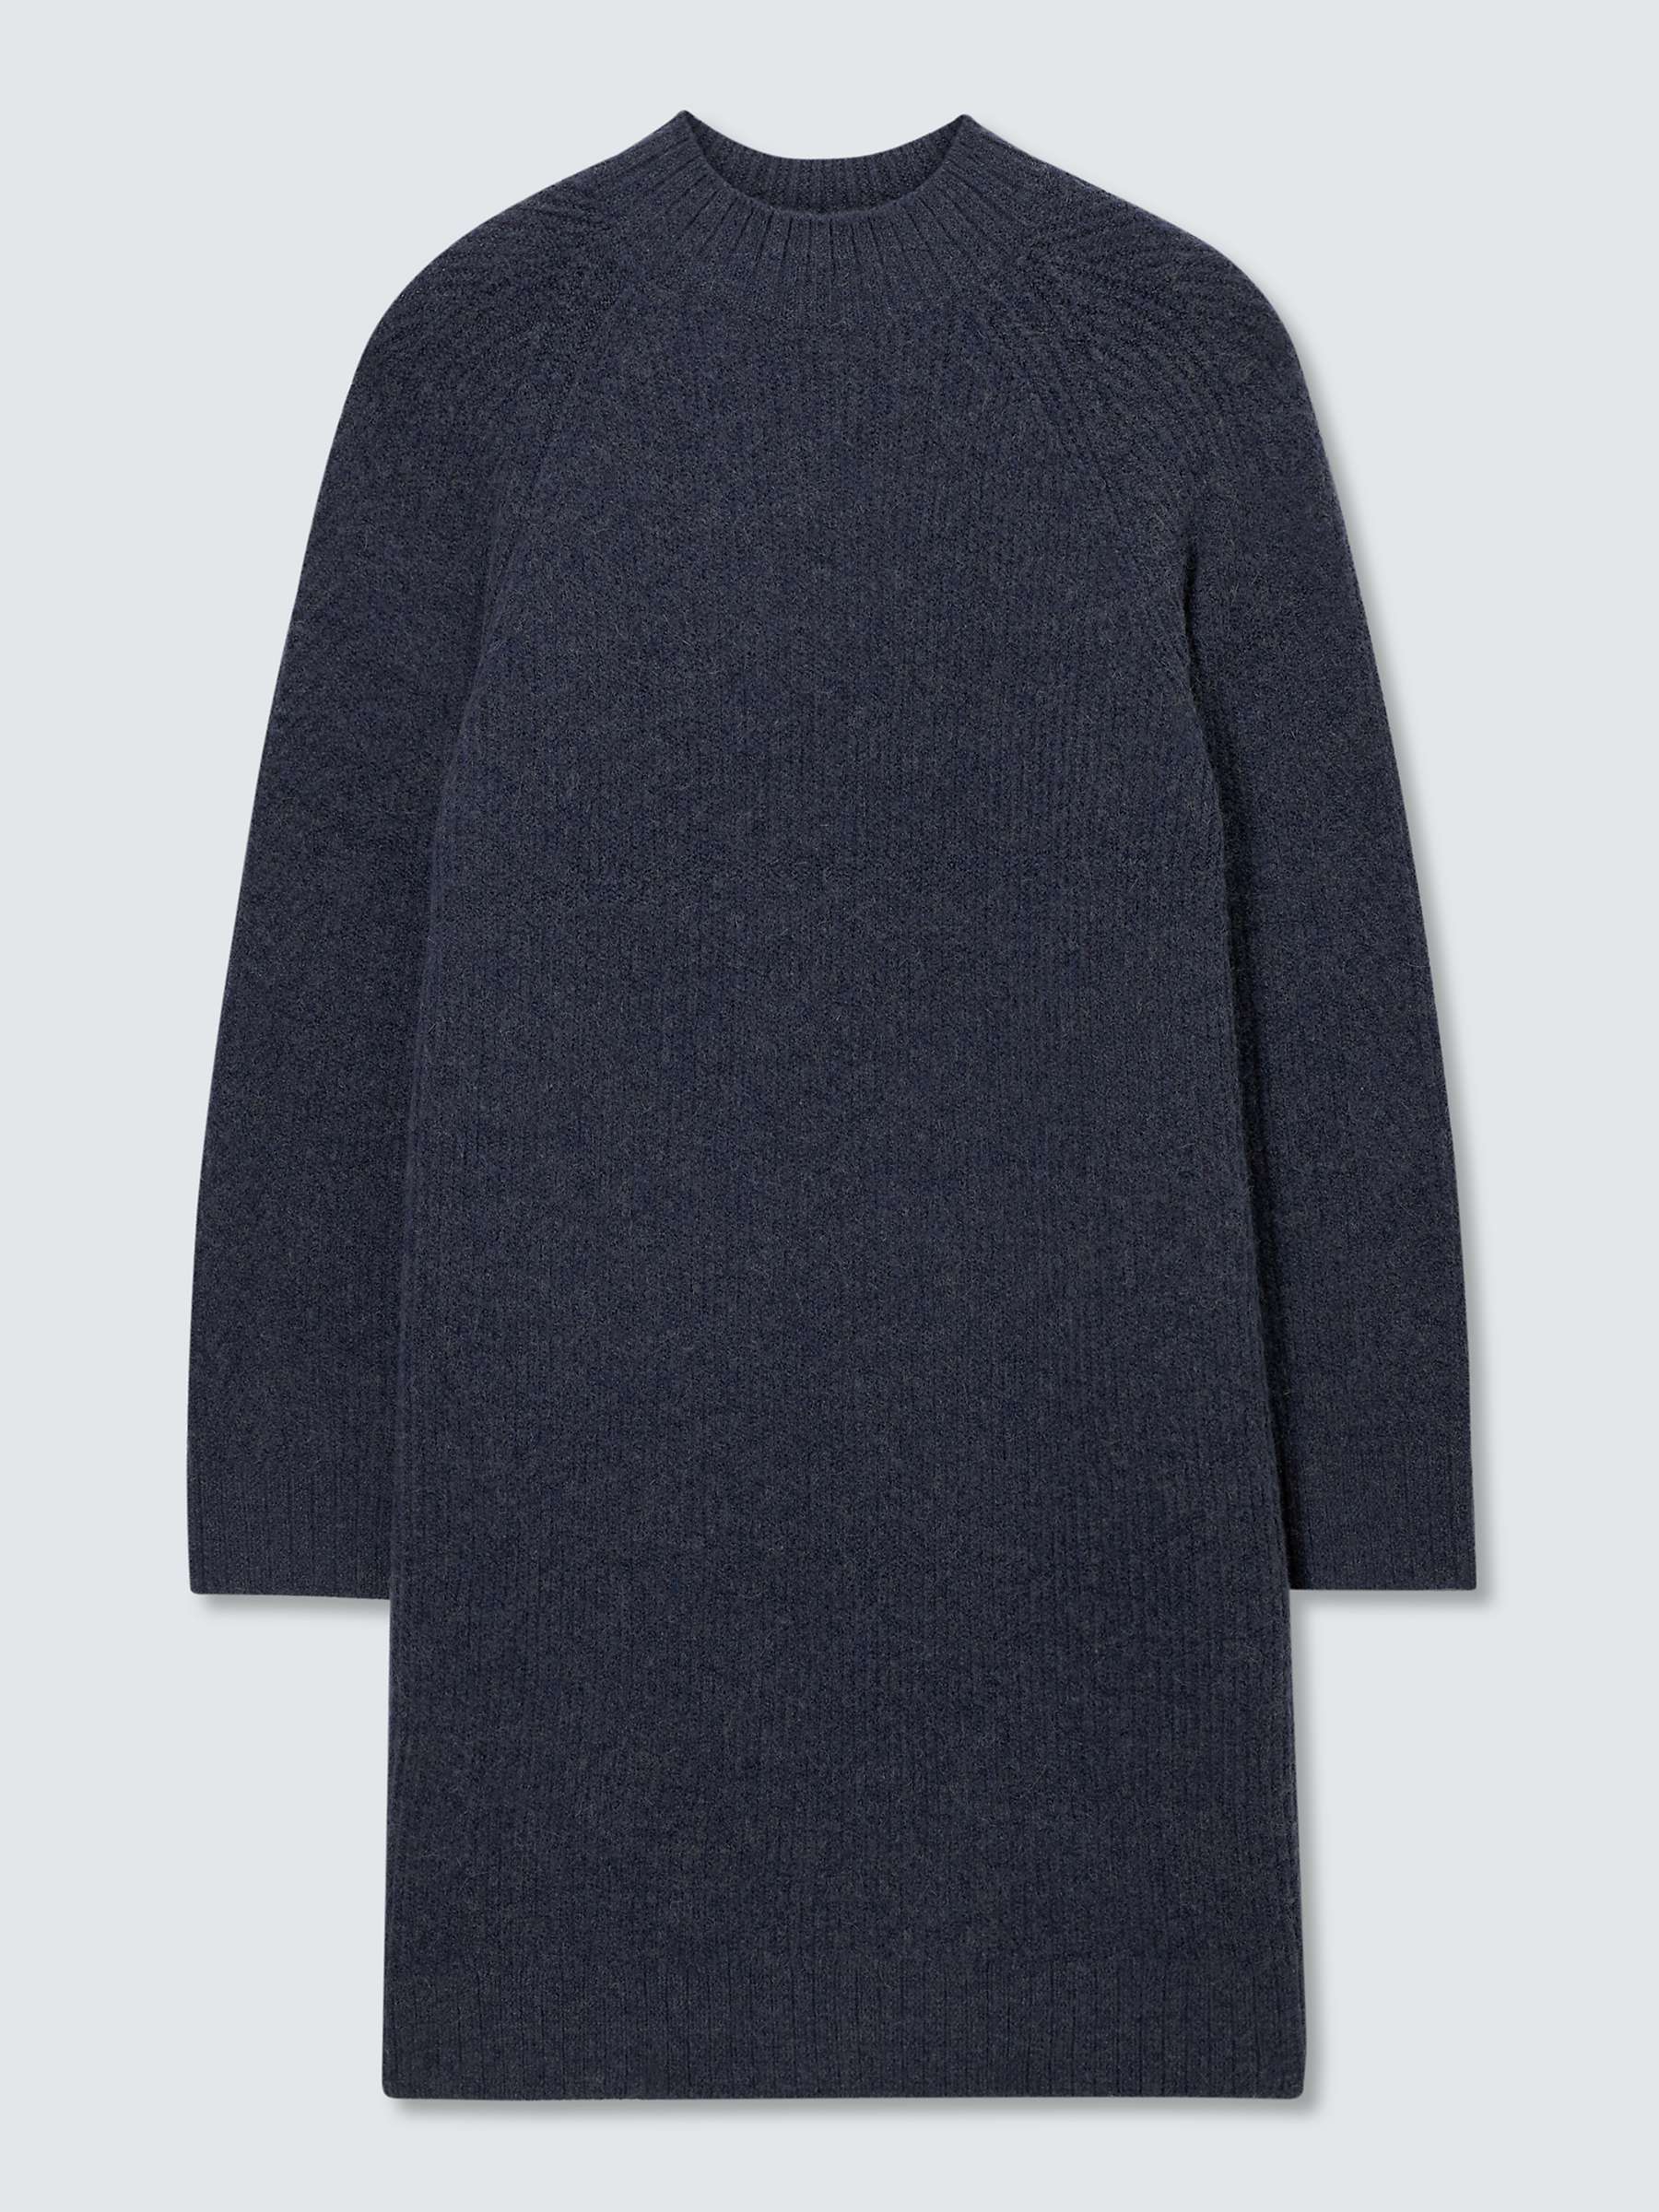 Buy AND/OR Molly Knit Wool Blend Jumper Dress Online at johnlewis.com